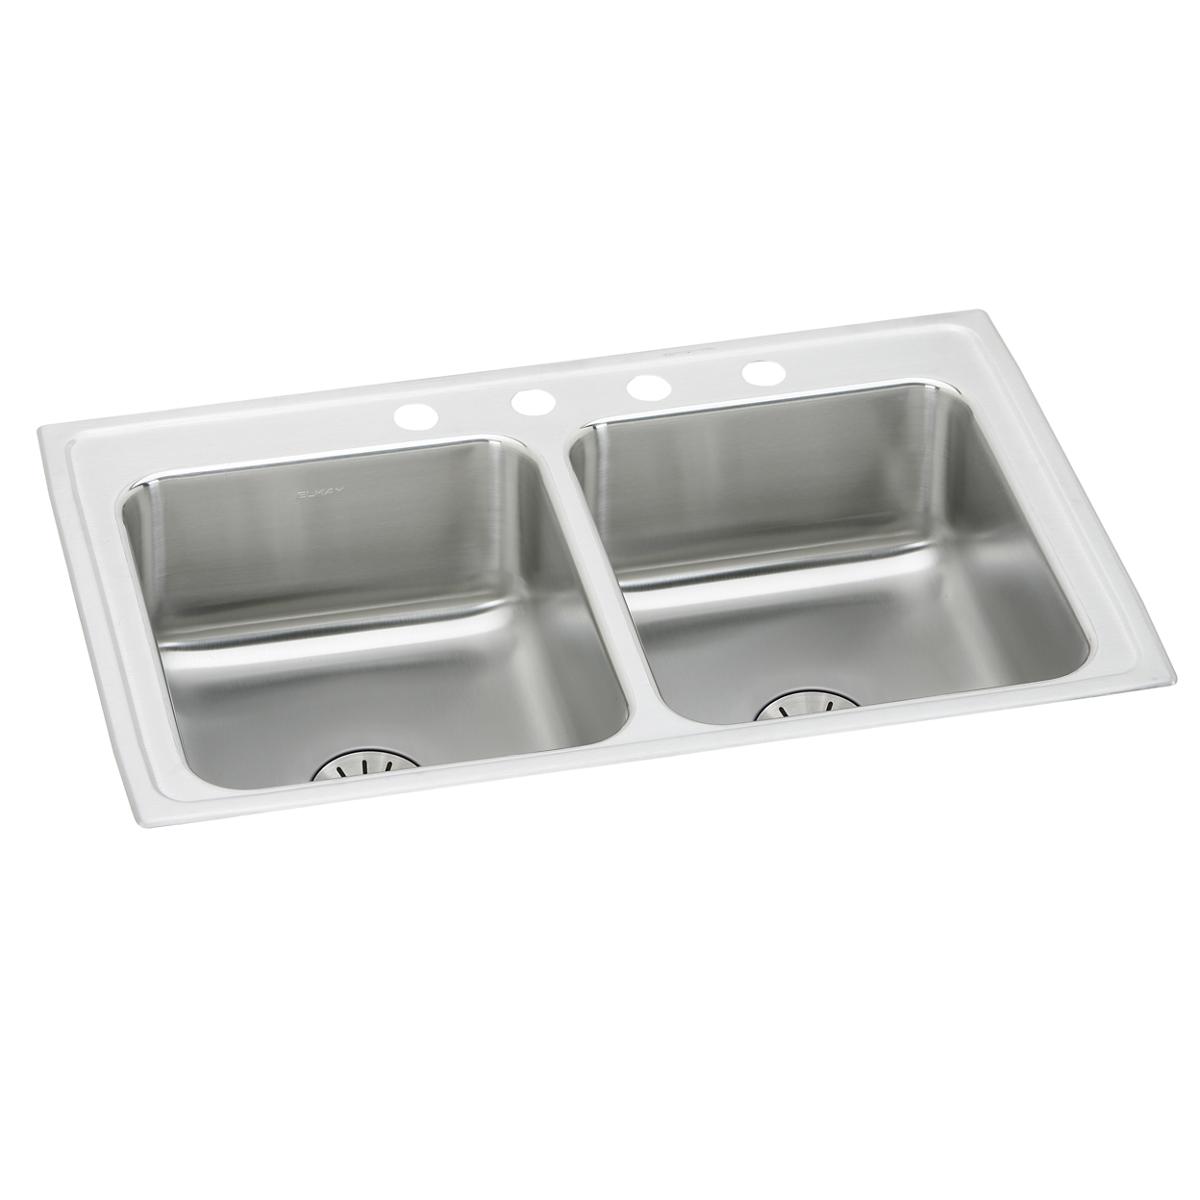 Elkay Lustertone Classic 29" x 18" x 6-1/2" MR2-Hole Equal Double Bowl Drop-in ADA Sink w/ Perfect Drain